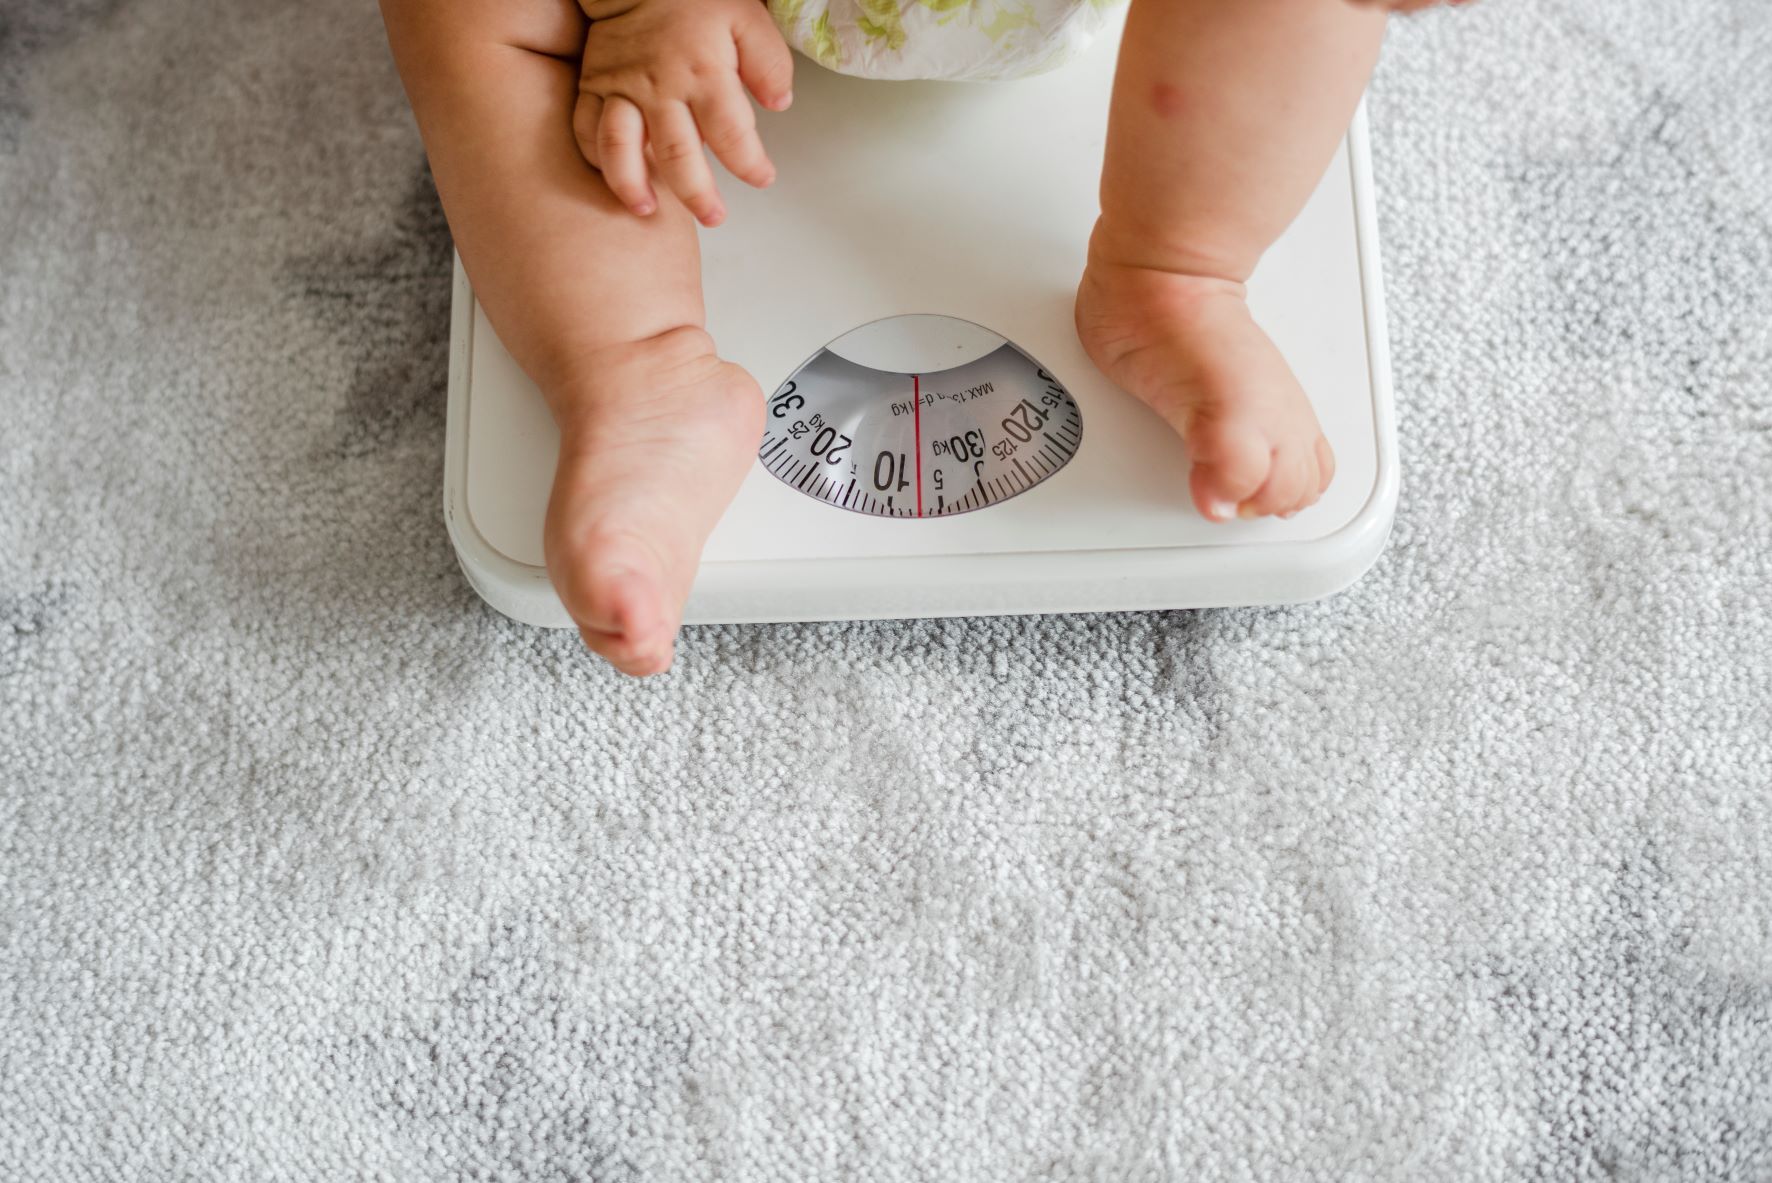 https://www.motherbearreviews.com/content/images/2023/01/closeup-baby-s-legs-weighing-scale-4.jpg